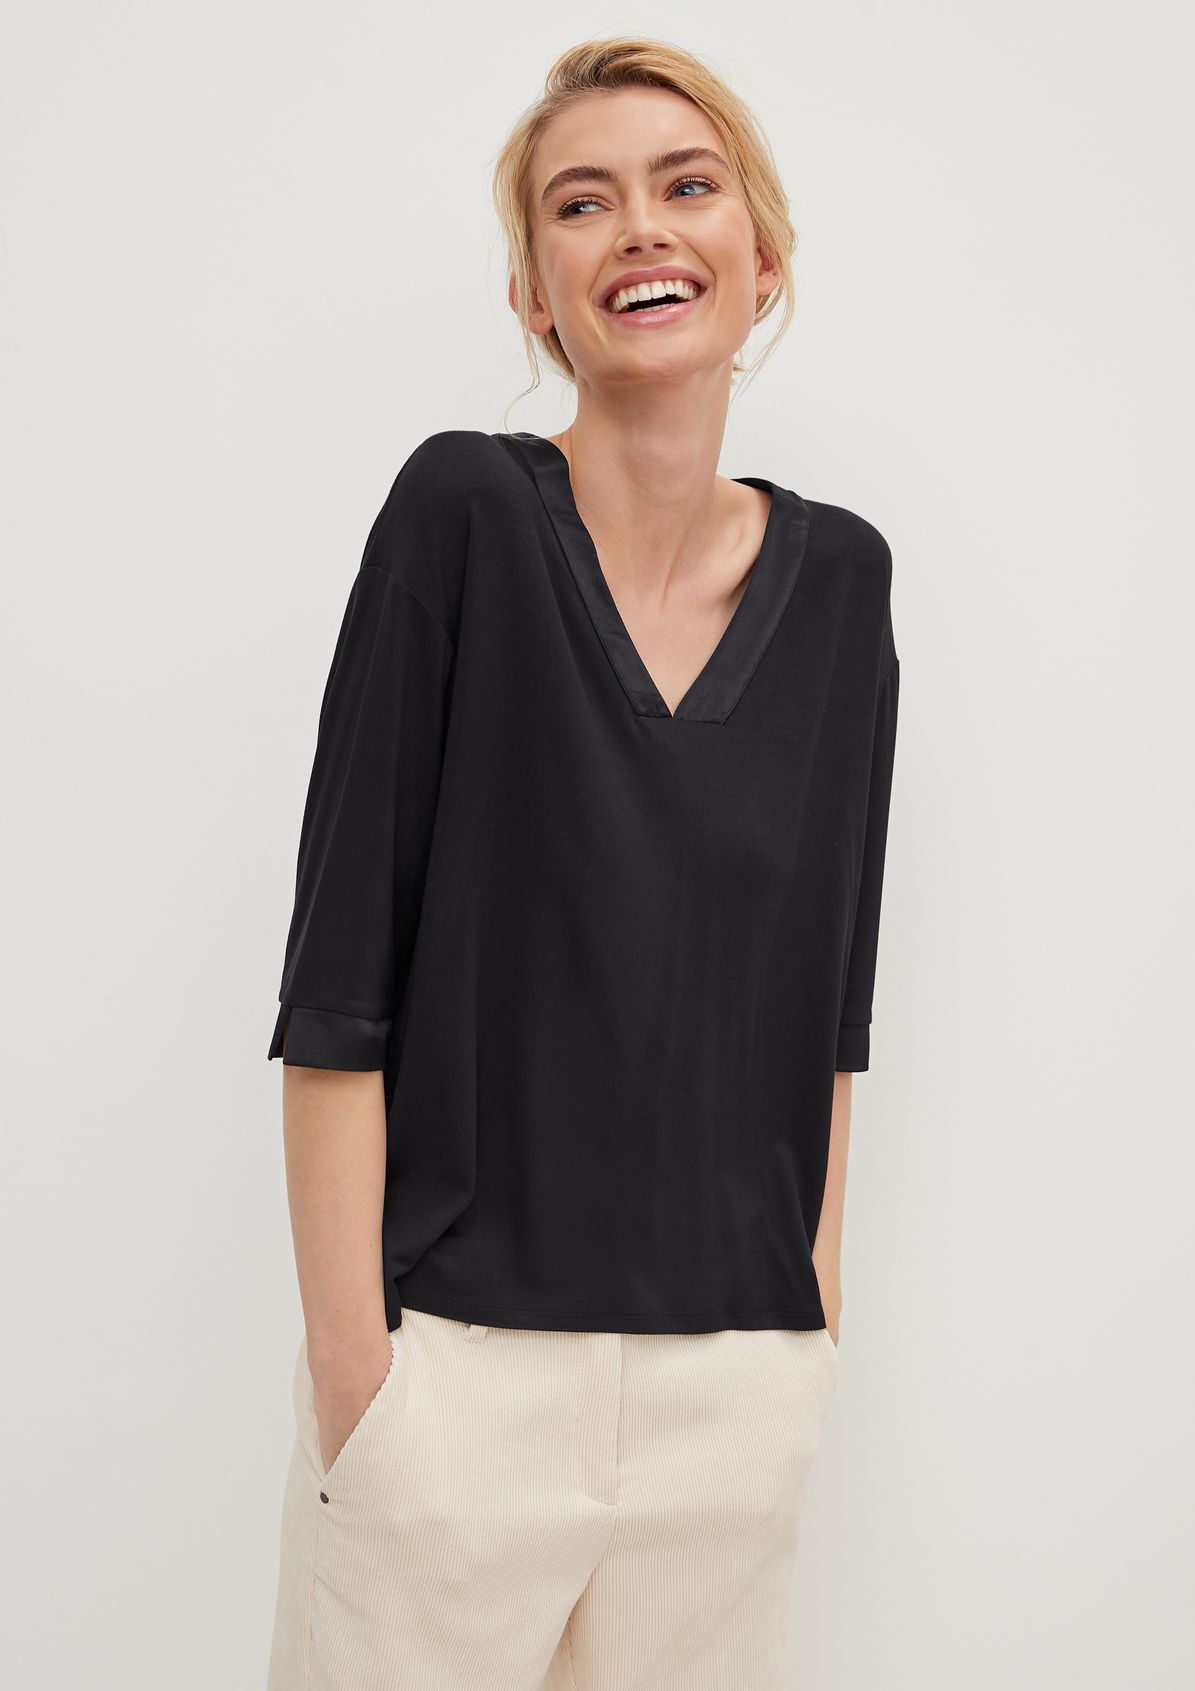 Top with mixed fabric details from comma